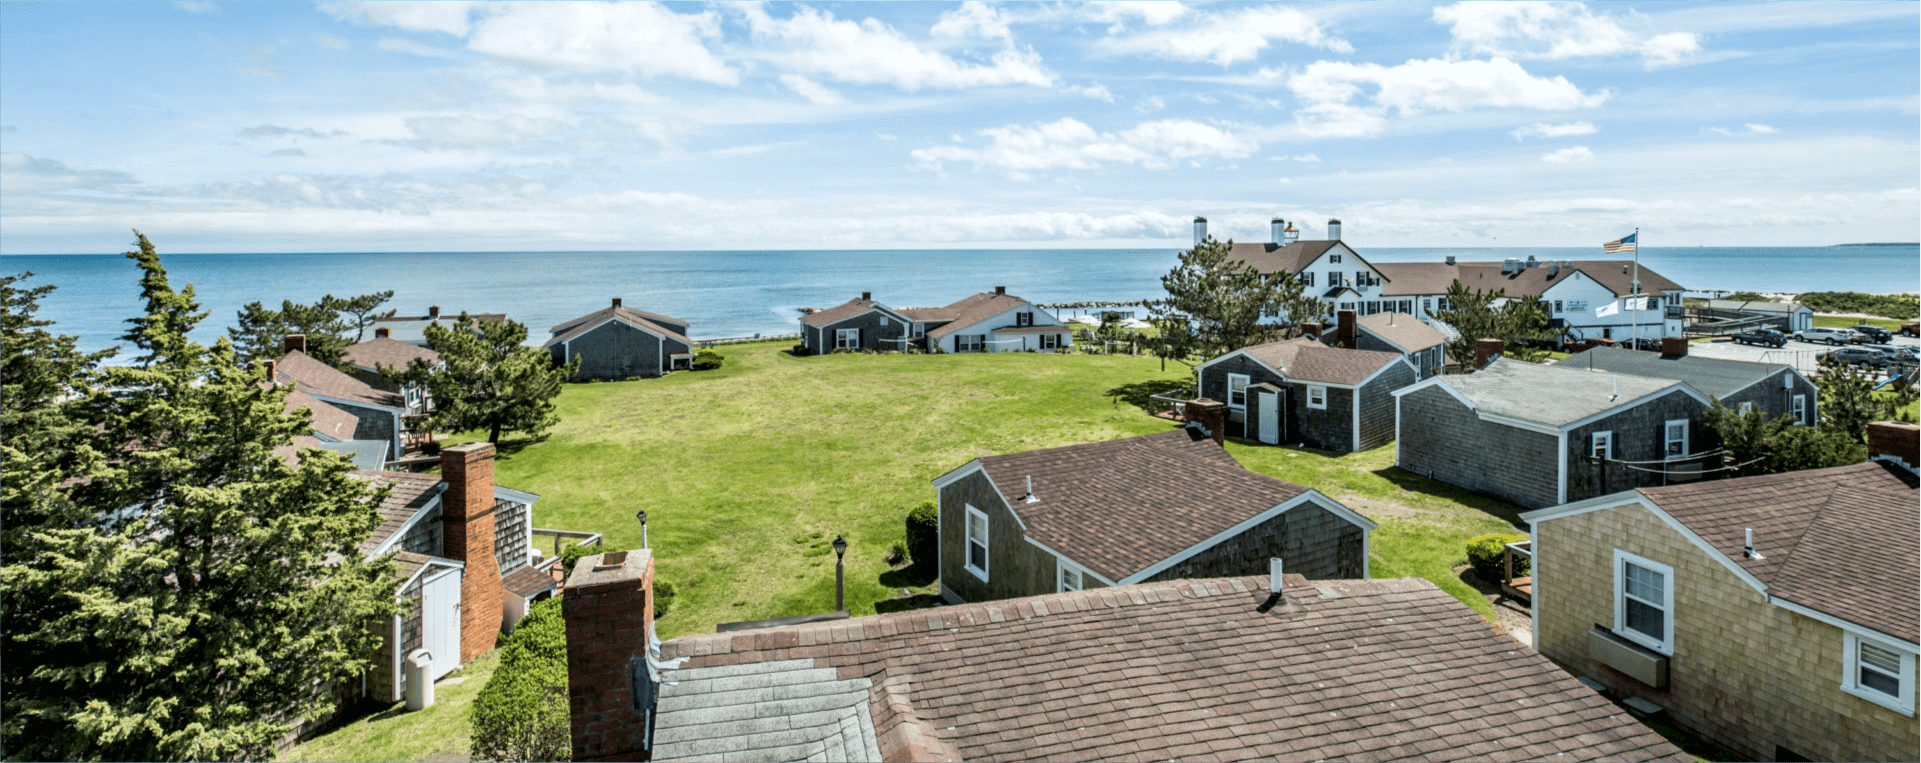 Lighthouse Inn aerial property overview